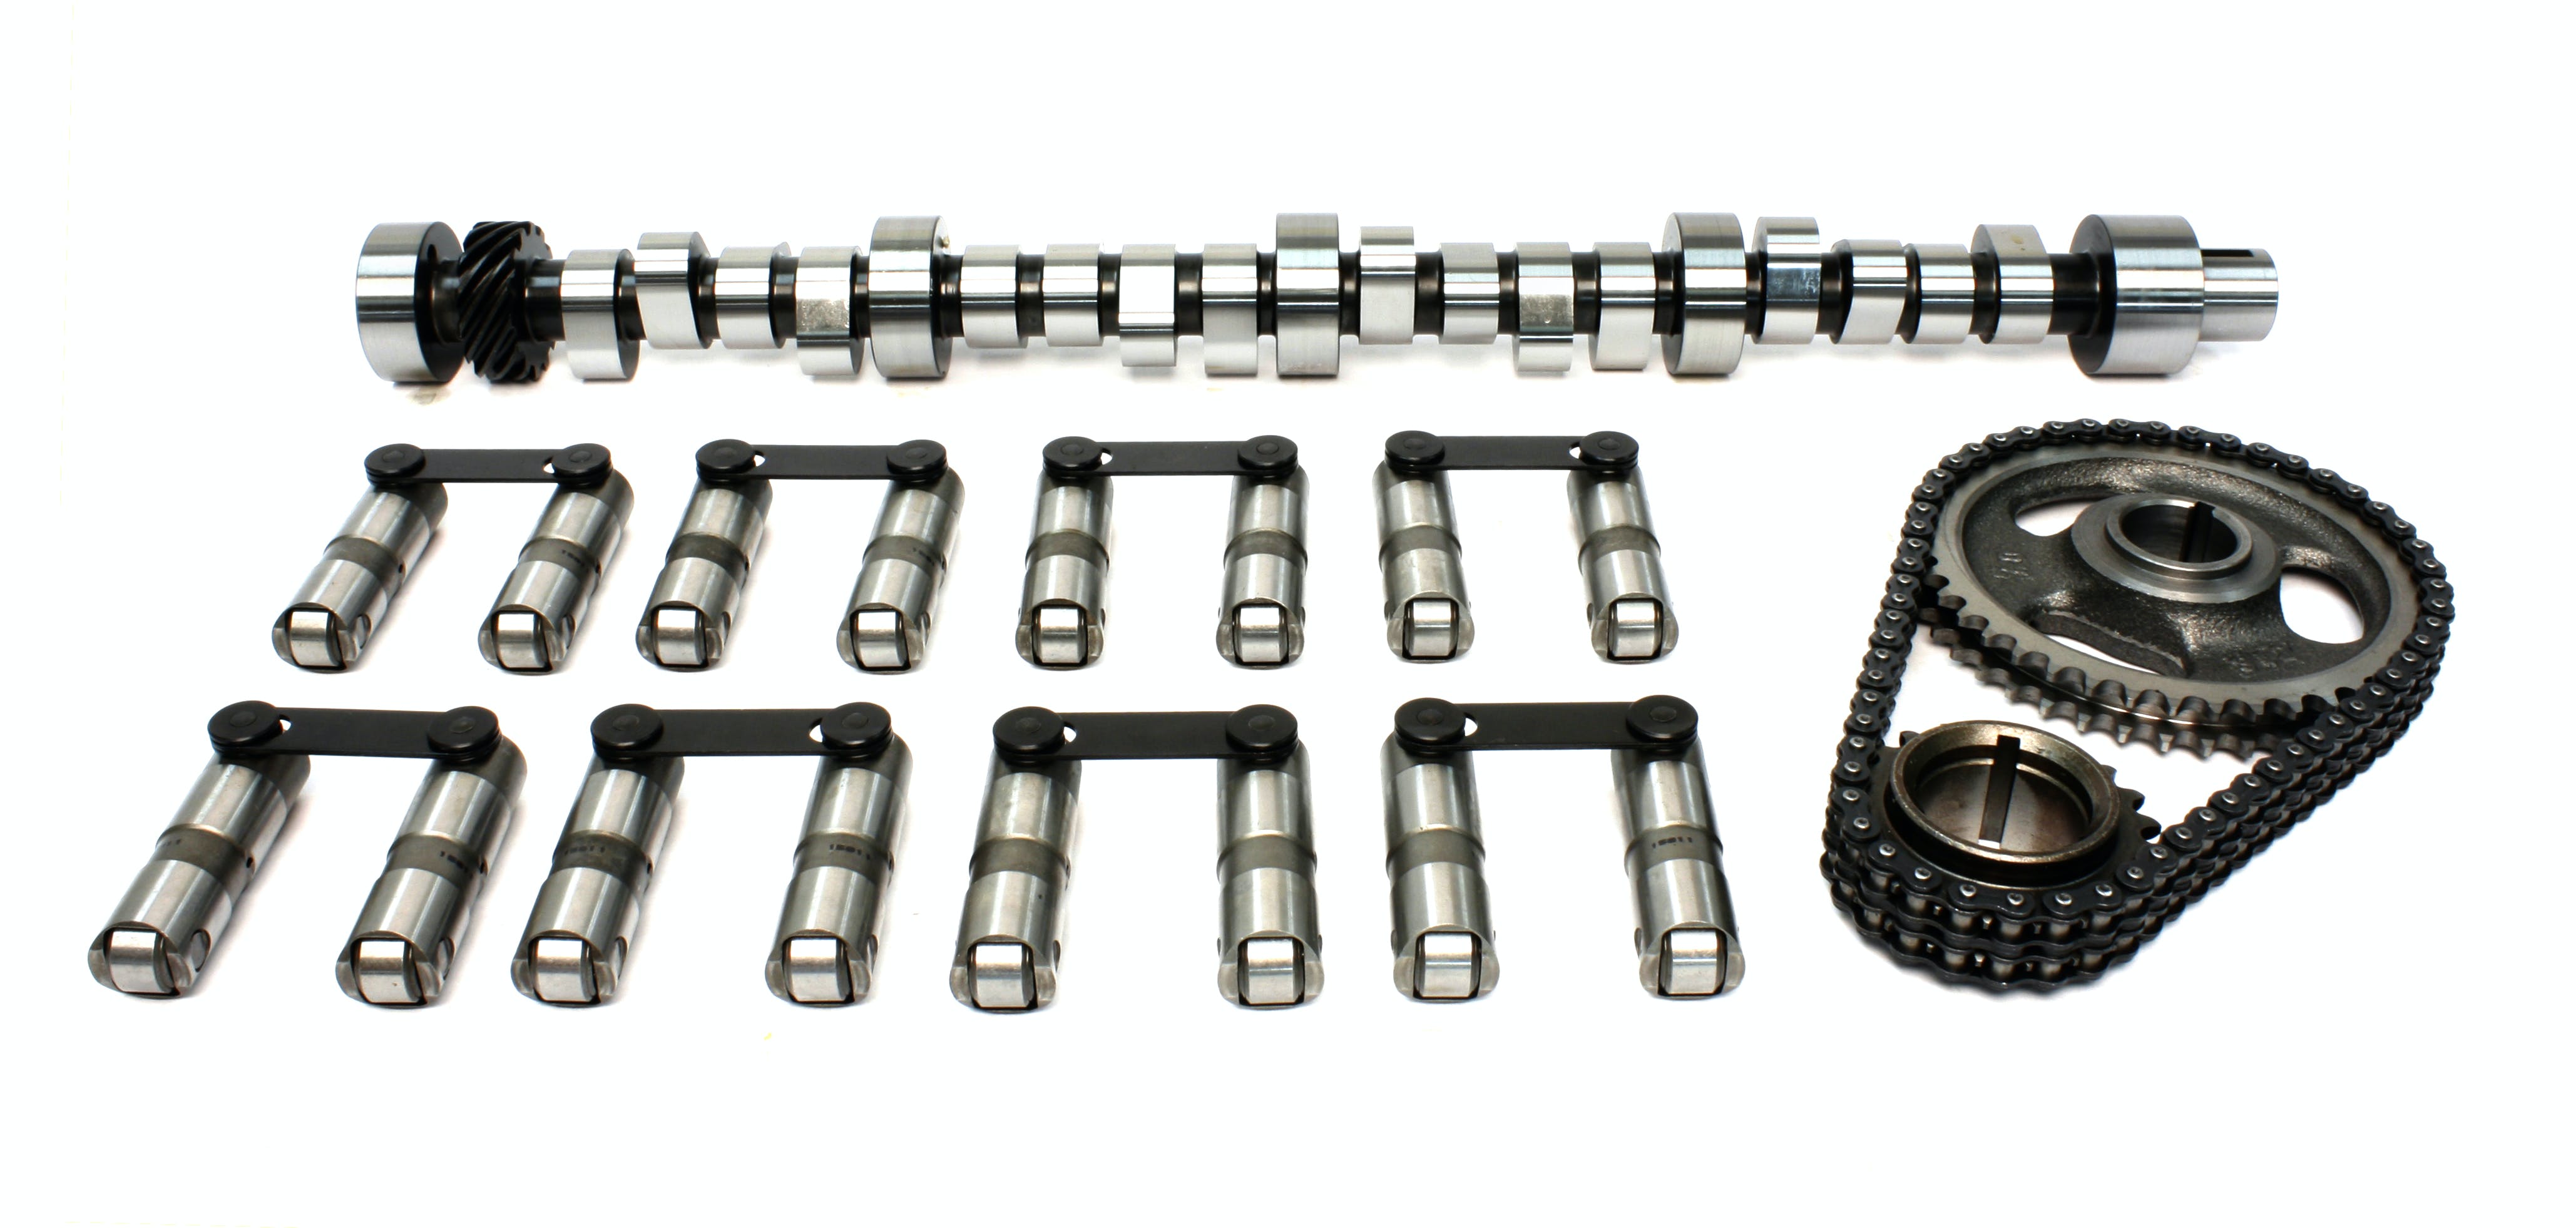 Competition Cams SK51-423-11 Xtreme Energy 224/230 Hydraulic Roller SK-Kit for Pontiac 265-455